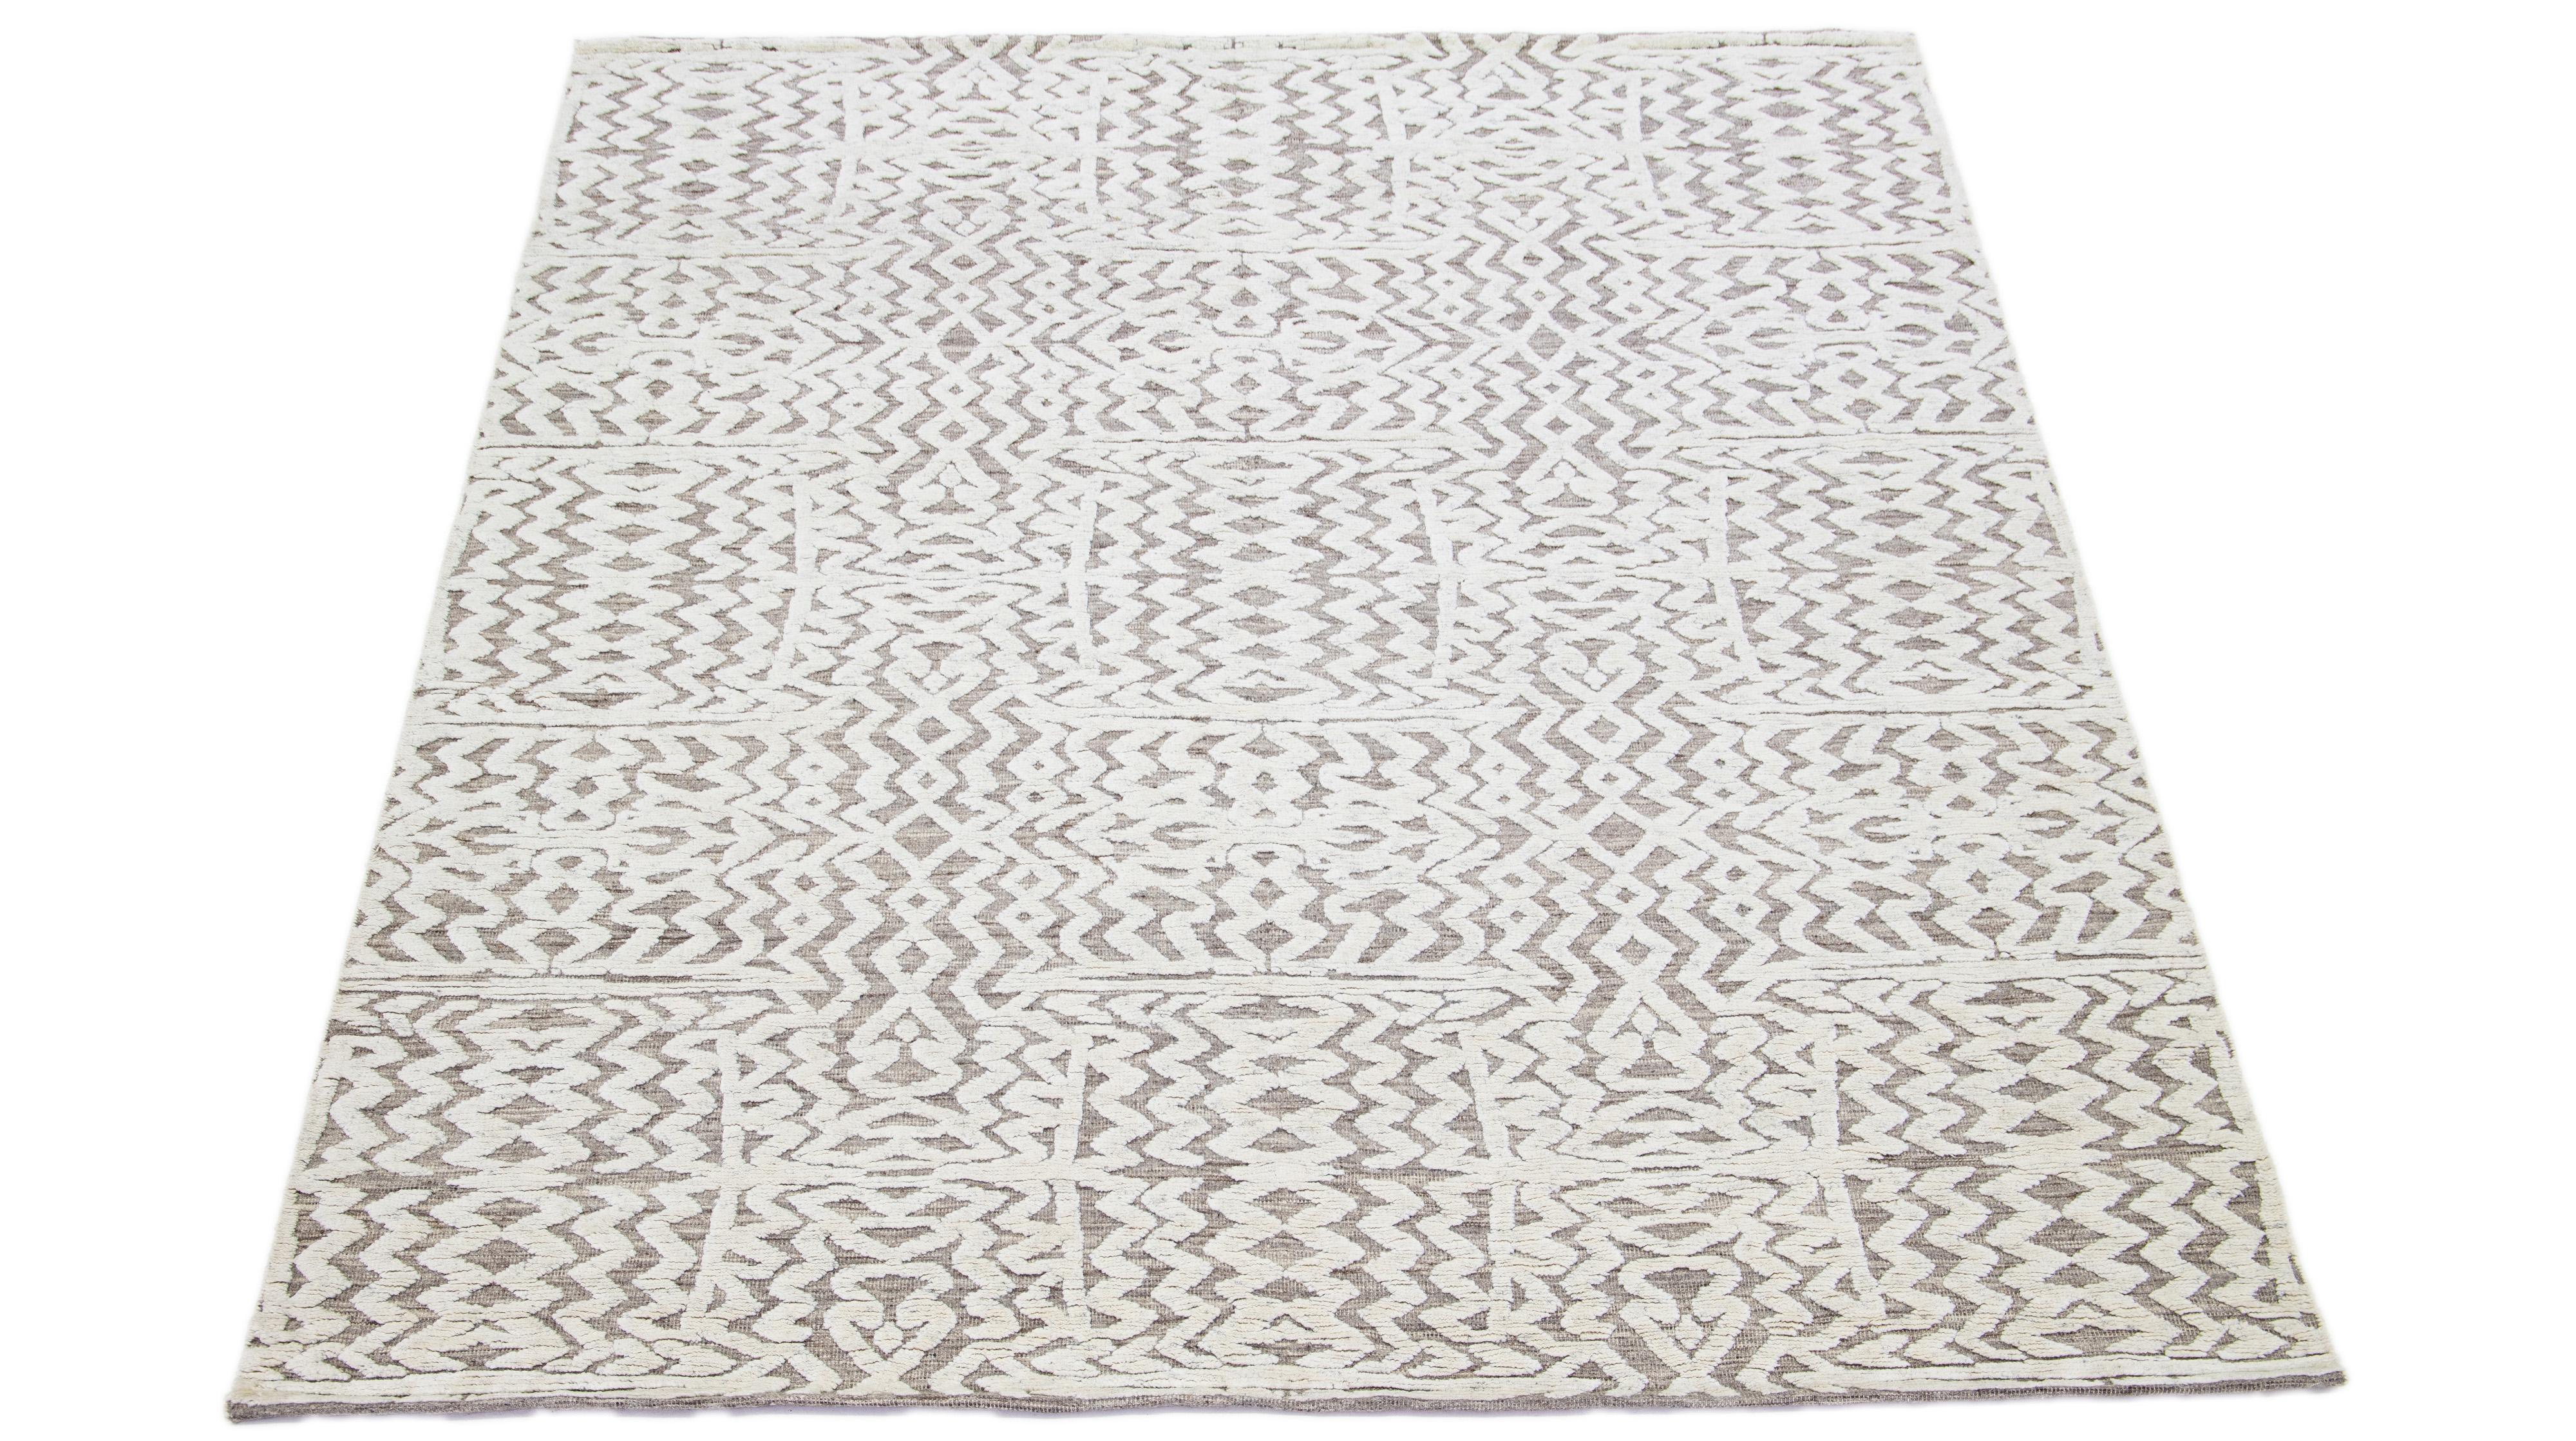 This wool rug, hand-knotted and boasting a contemporary Moroccan-inspired pattern, features subtle shades of Ivory set against a striking gray backdrop, producing a mesmerizing abstract design with seamless symmetry.

This rug measures 8'2